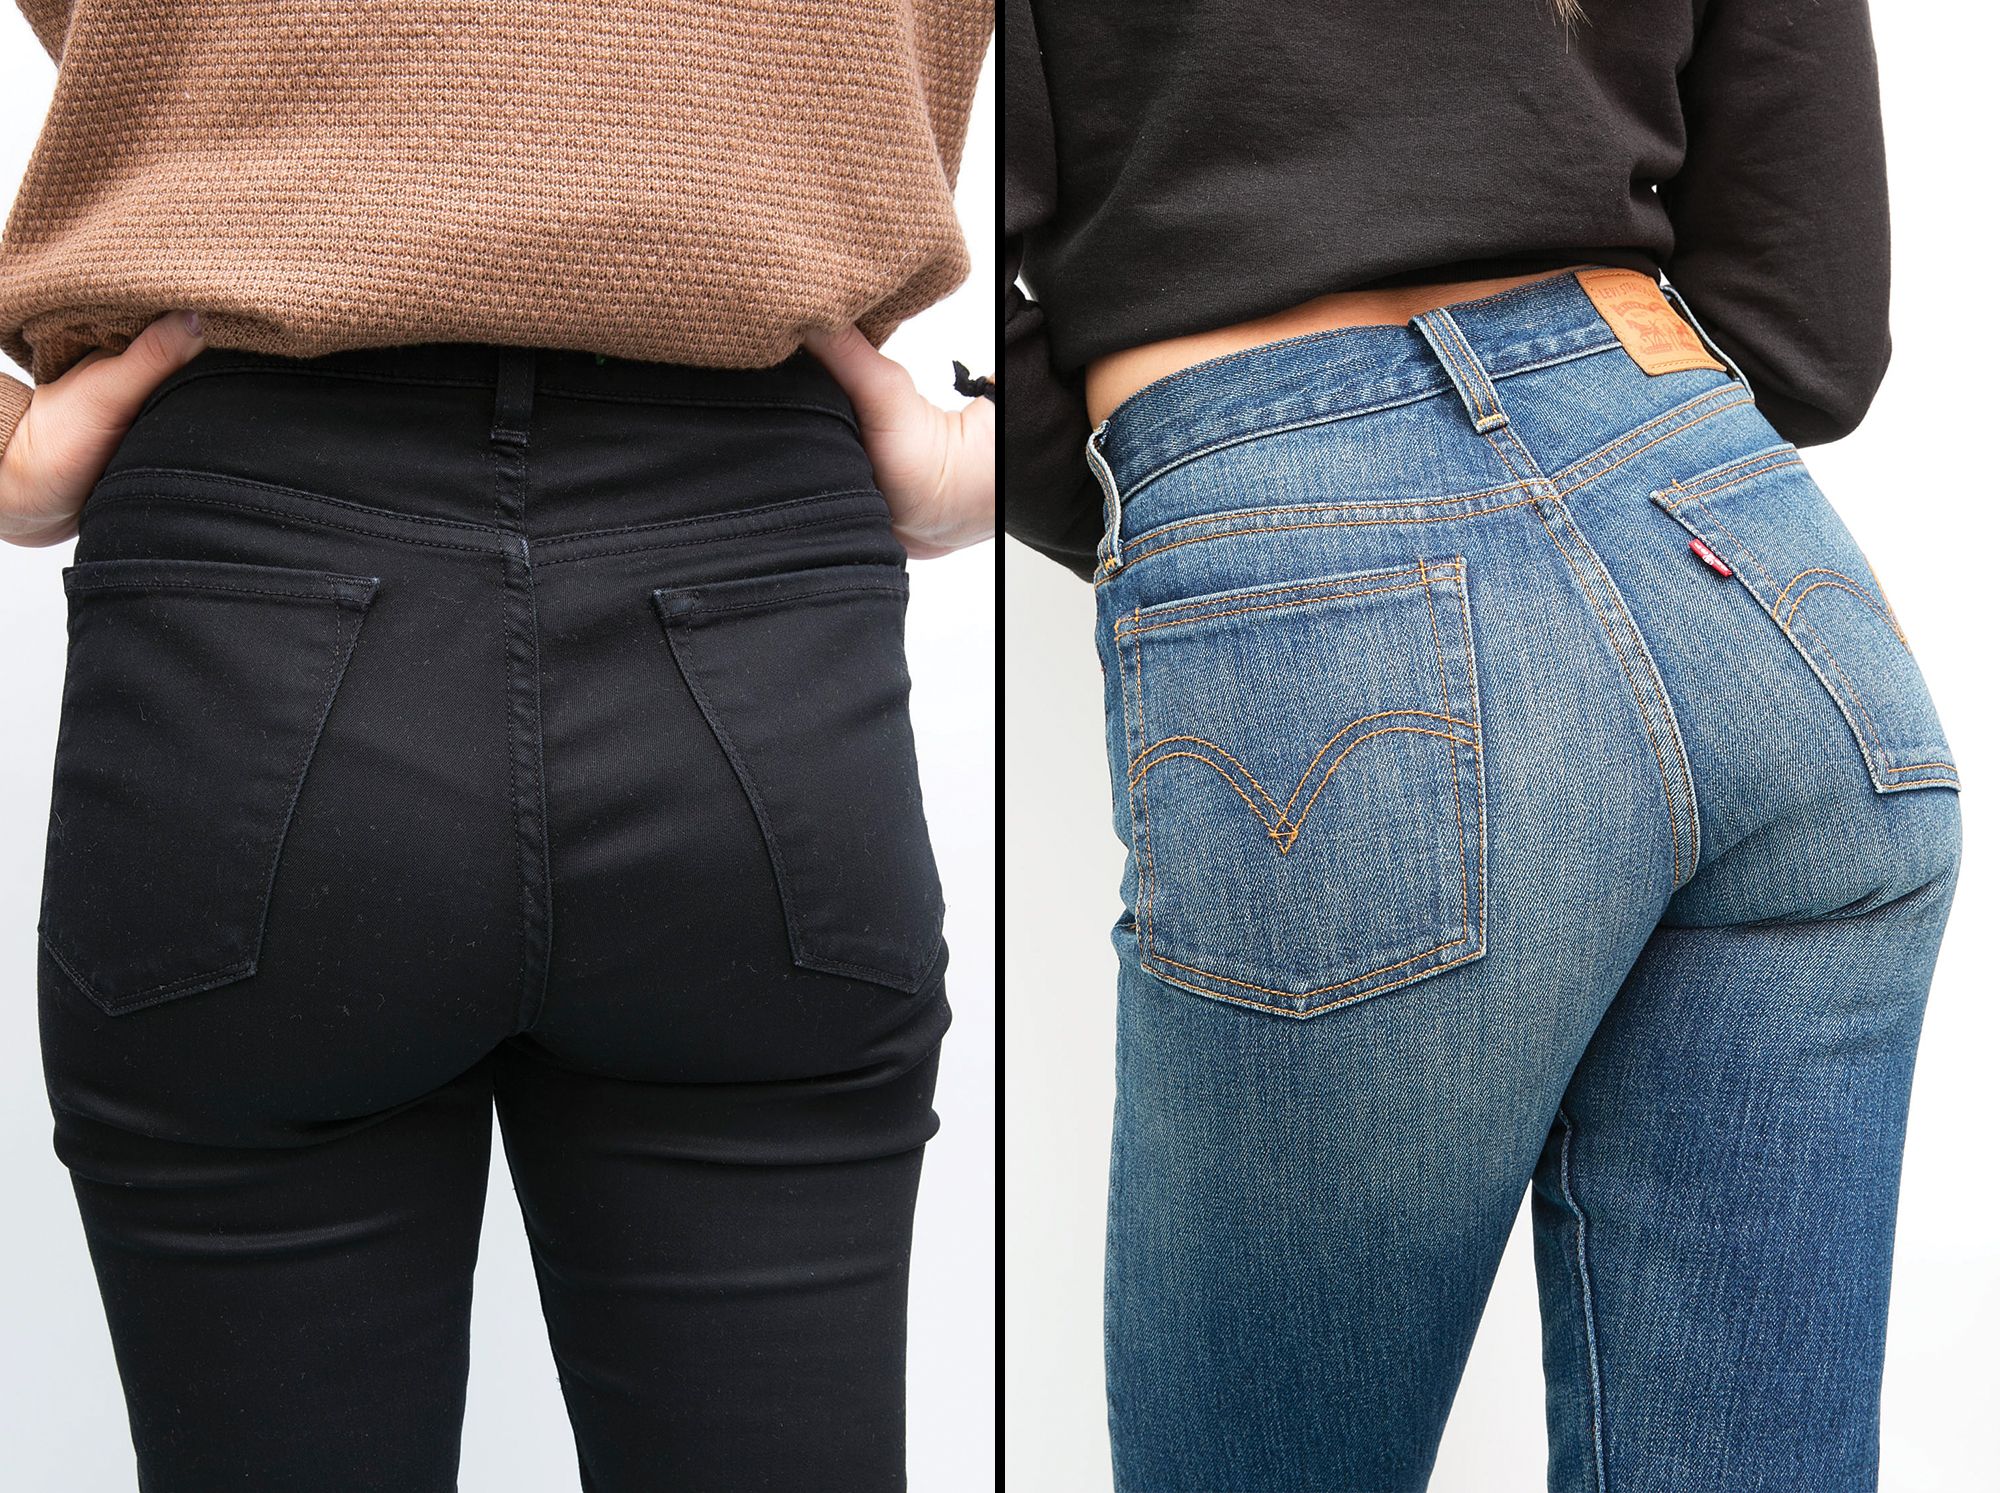 10 People Tried Wedgie Jeans and They Were Pretty Magical